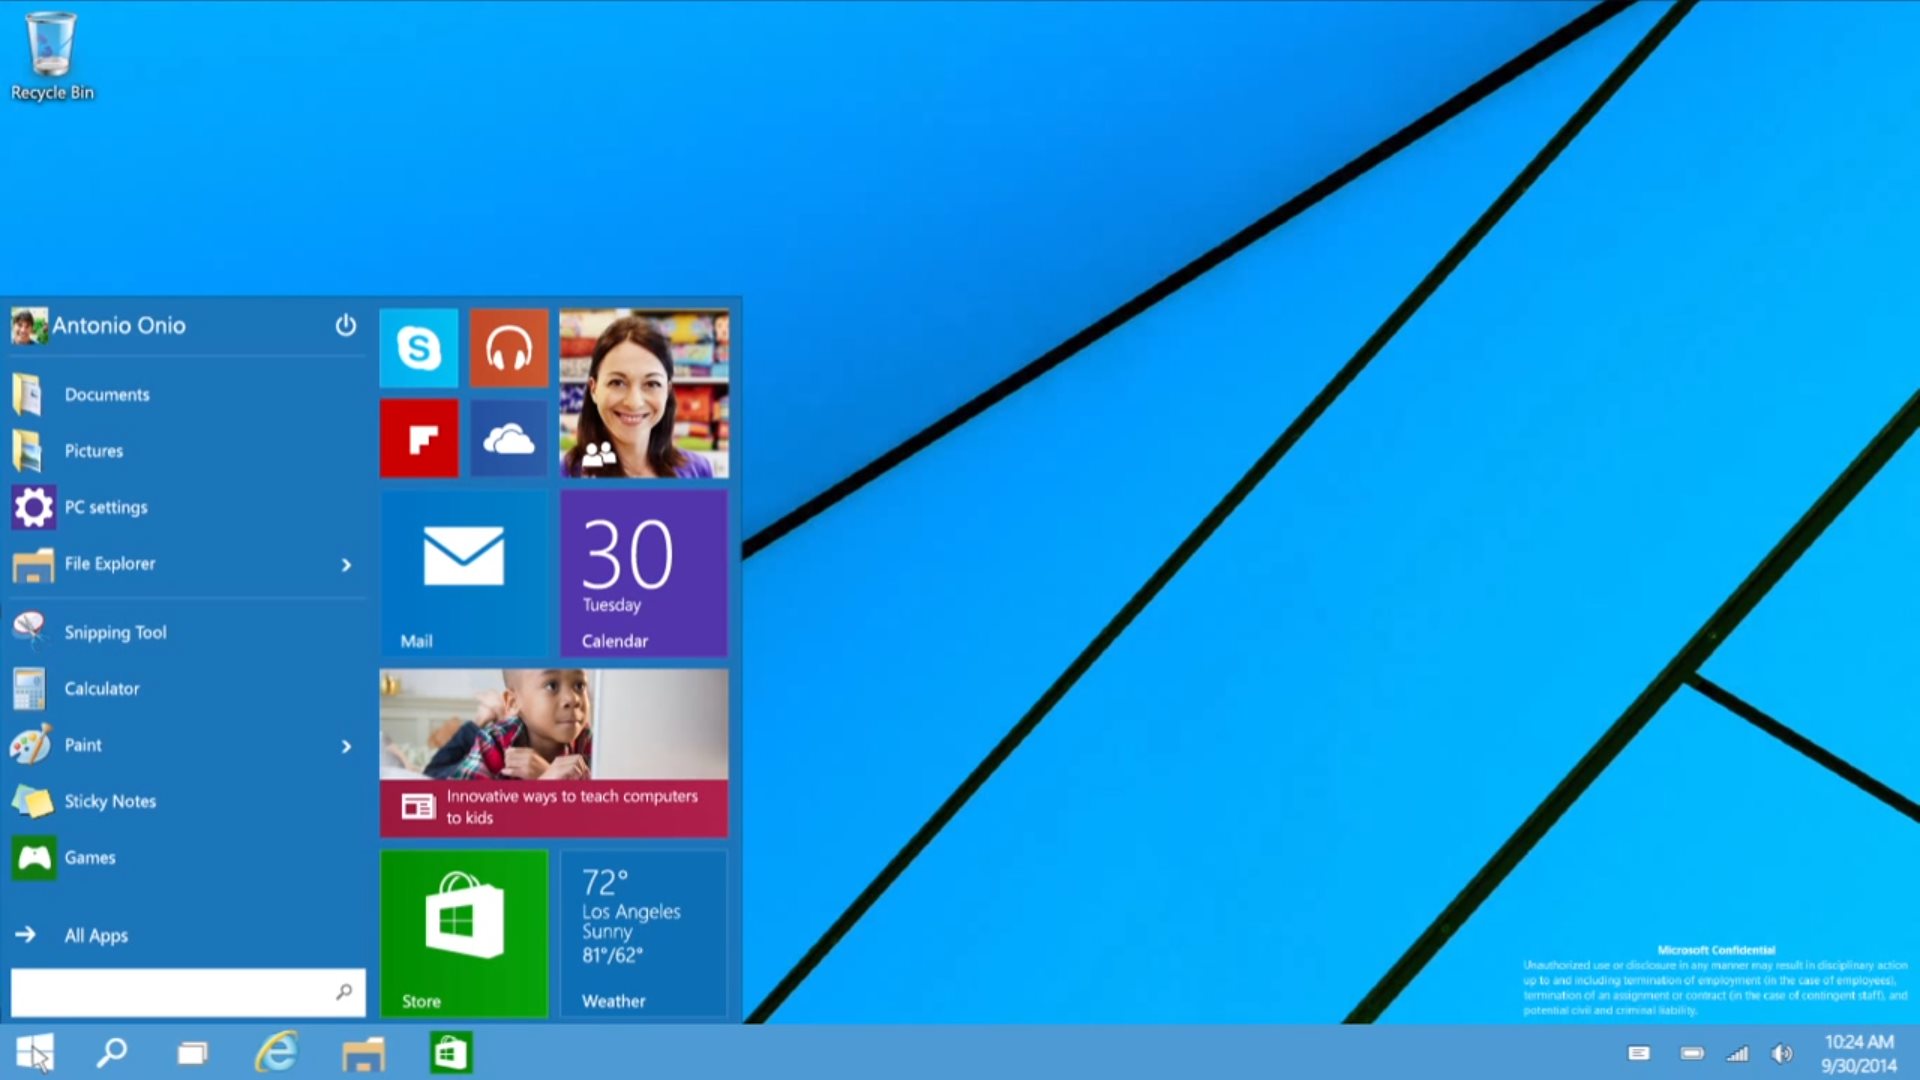 Windows Continuum Revealed in Official Video Softpedia